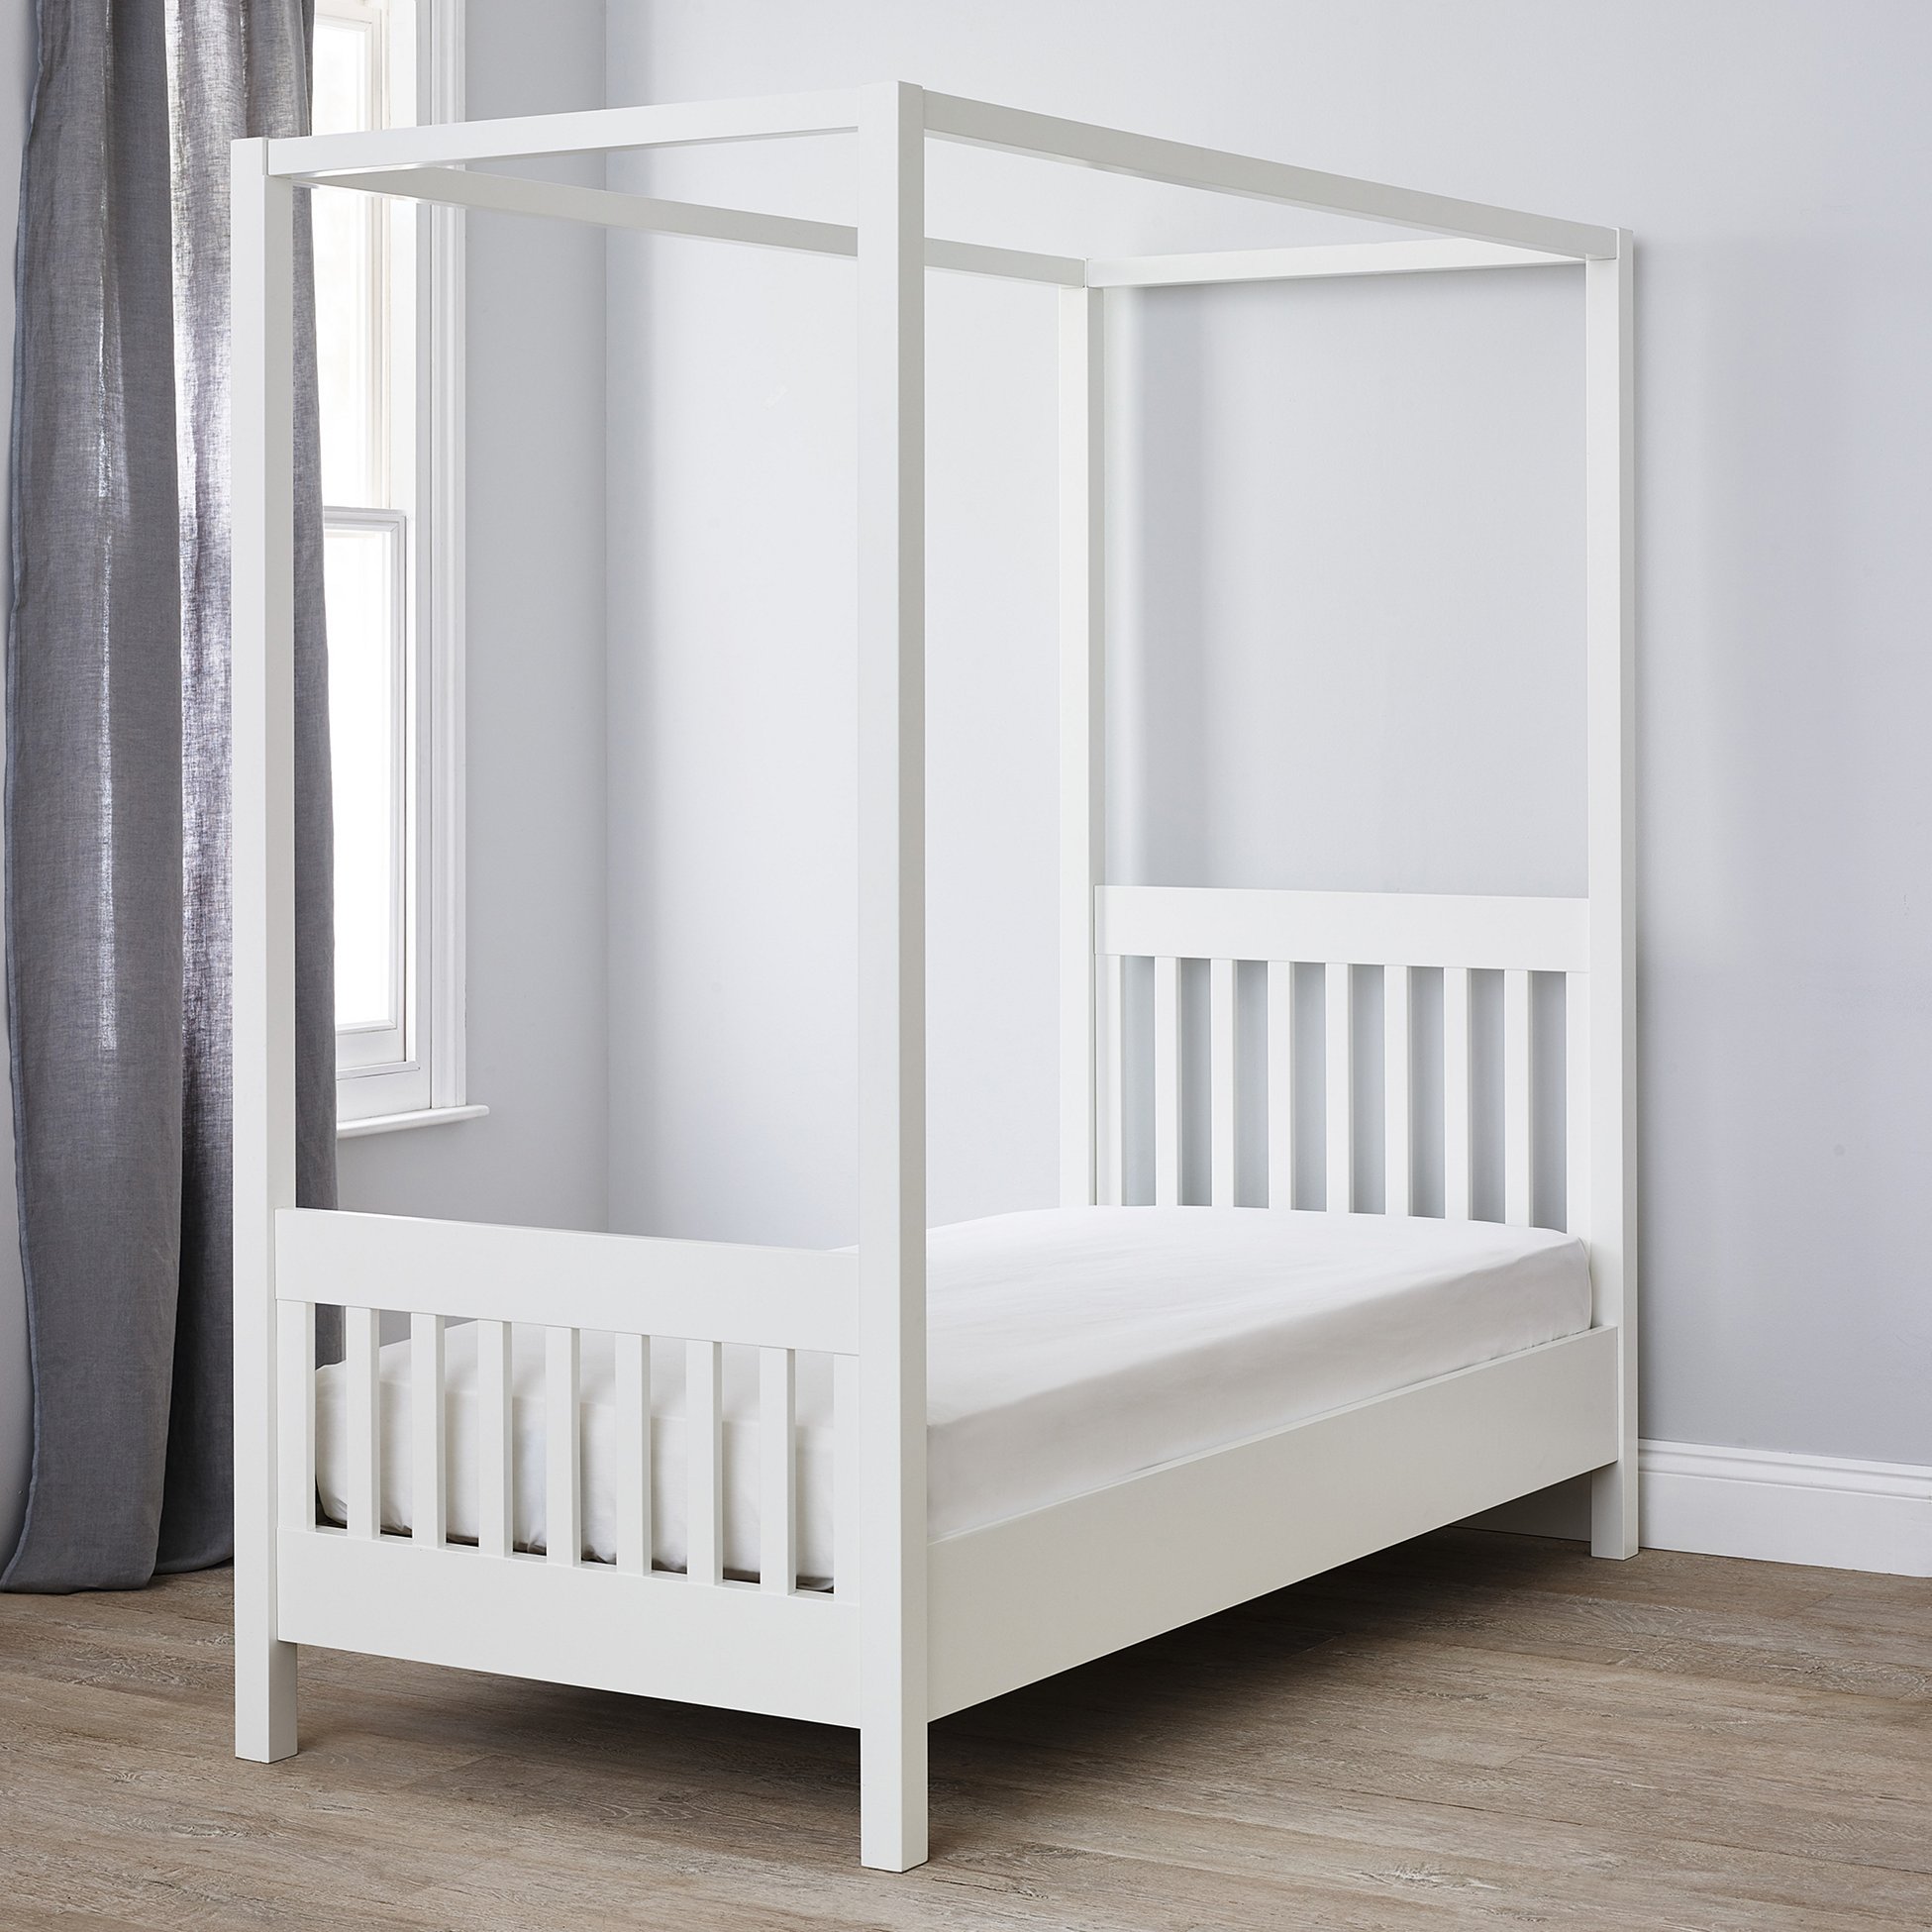 Classic Single Four Poster Bed Beds, White Four Poster Twin Bed